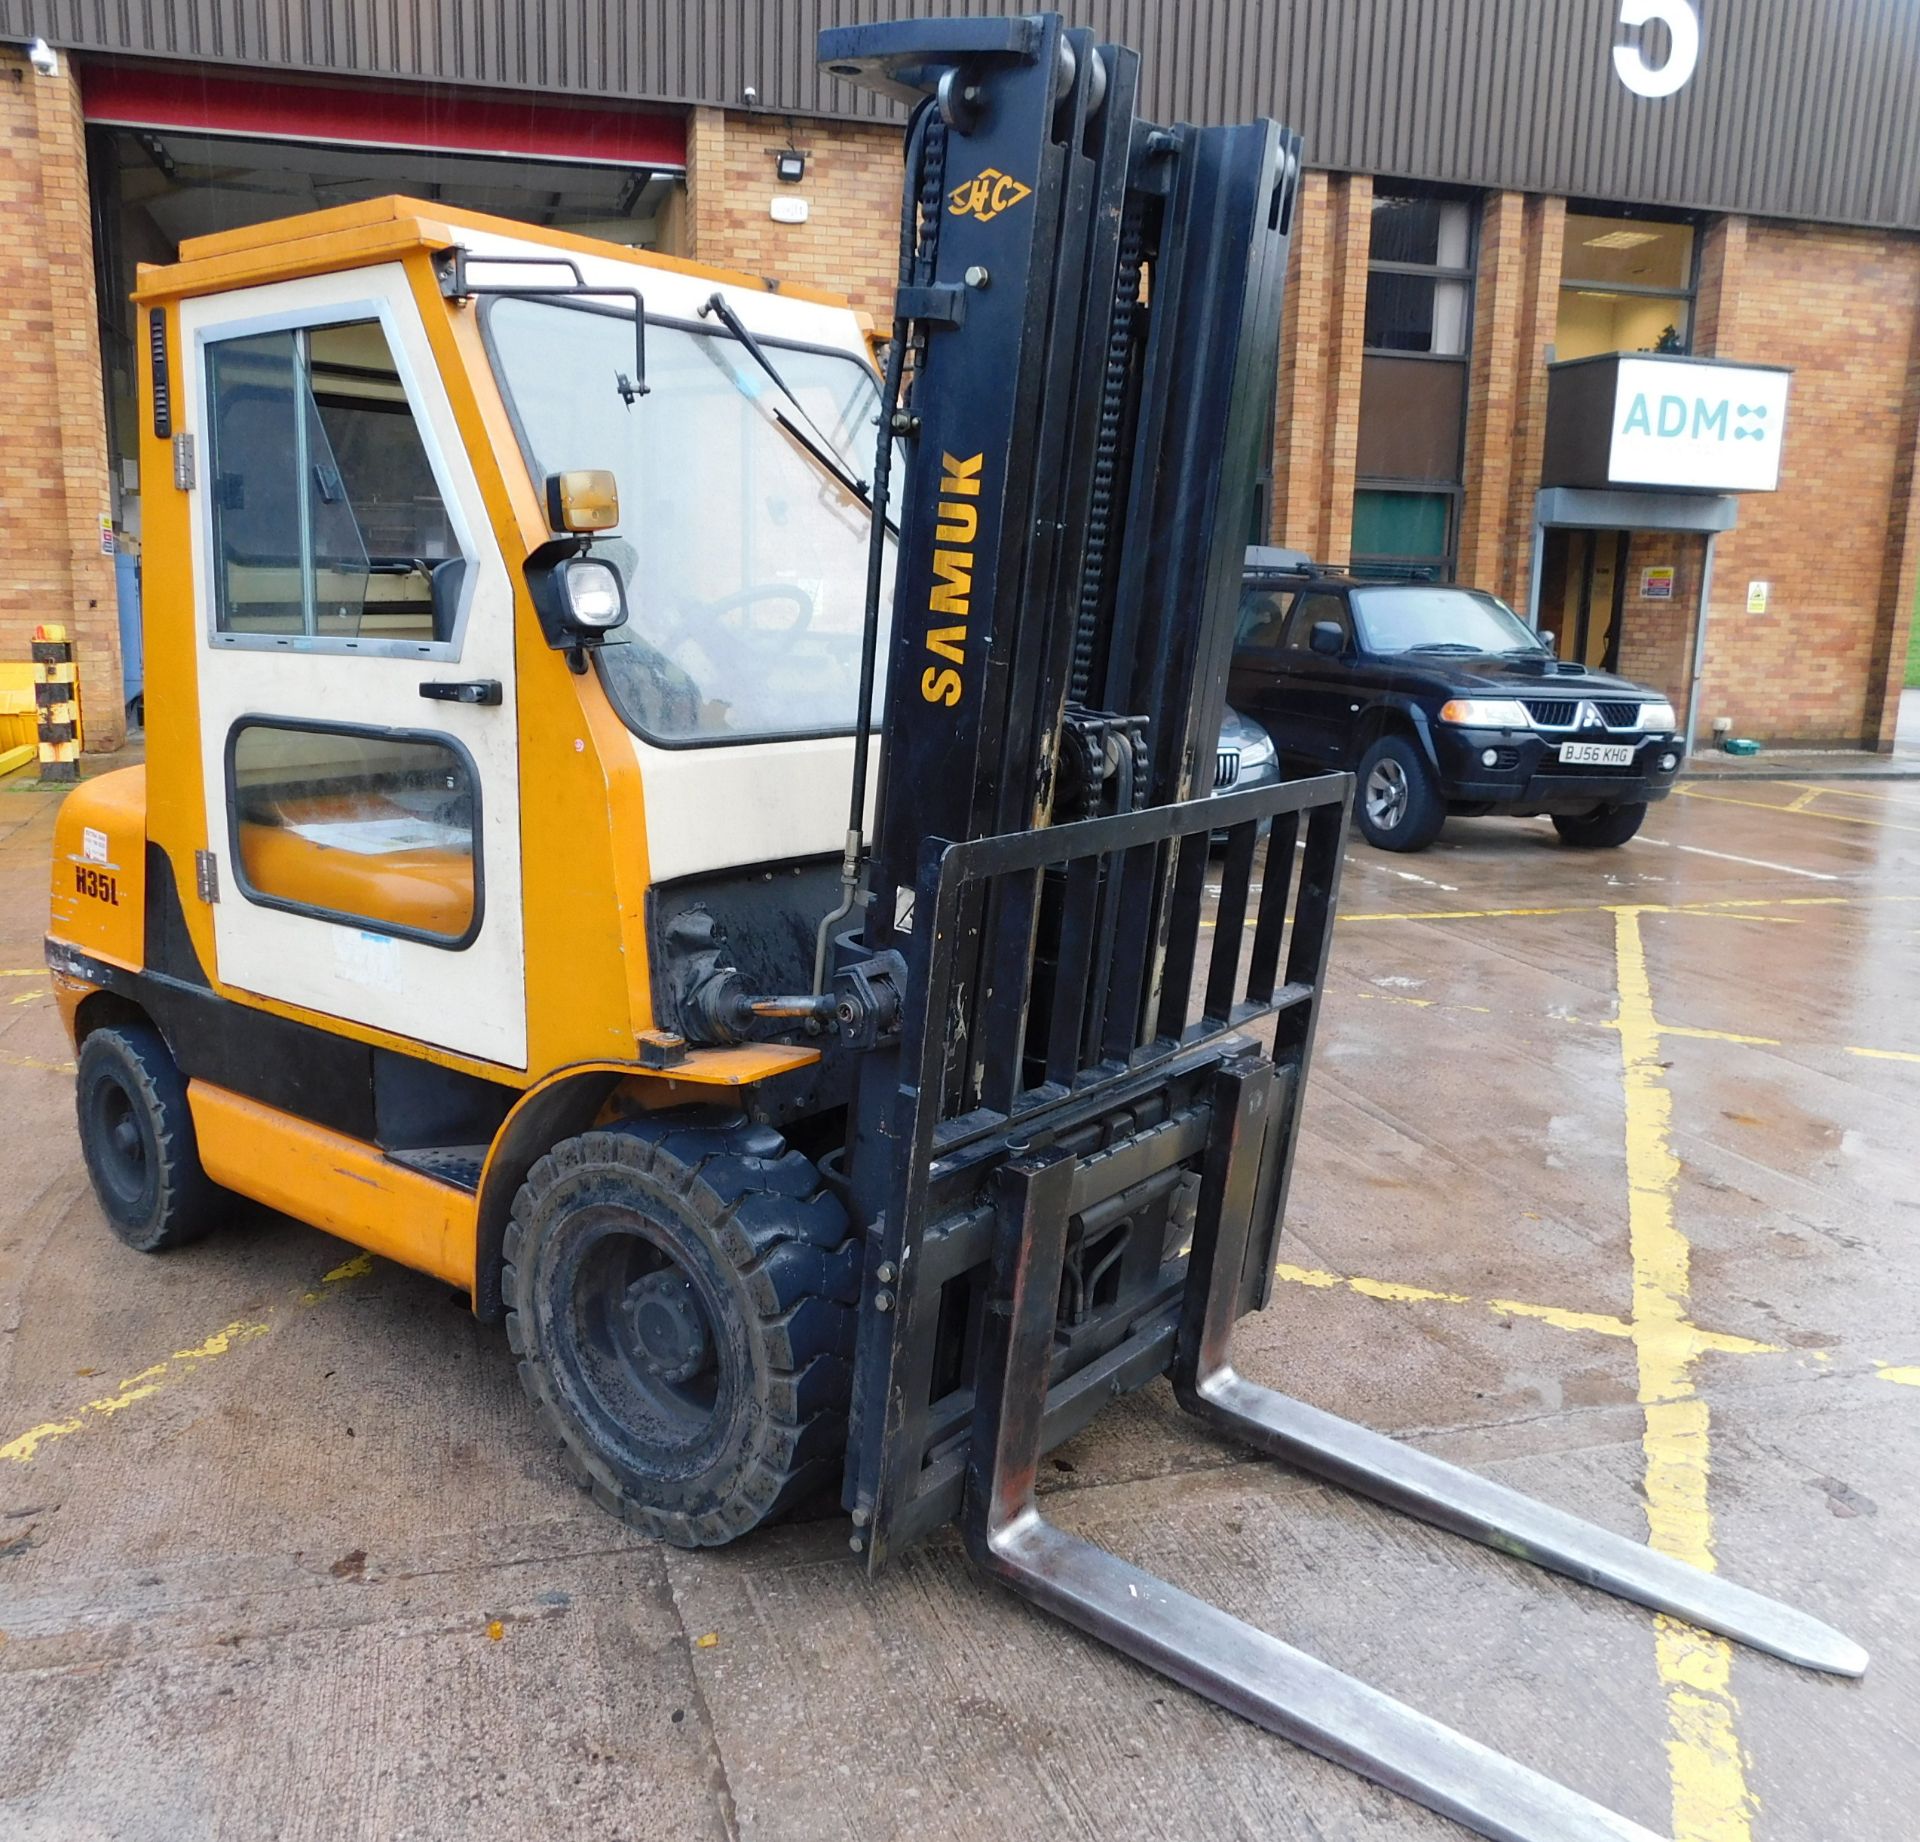 2007 Samuk H35L Gas Powered Forklift, Serial Number 070100559 (Located North Manchester. Please - Image 2 of 13